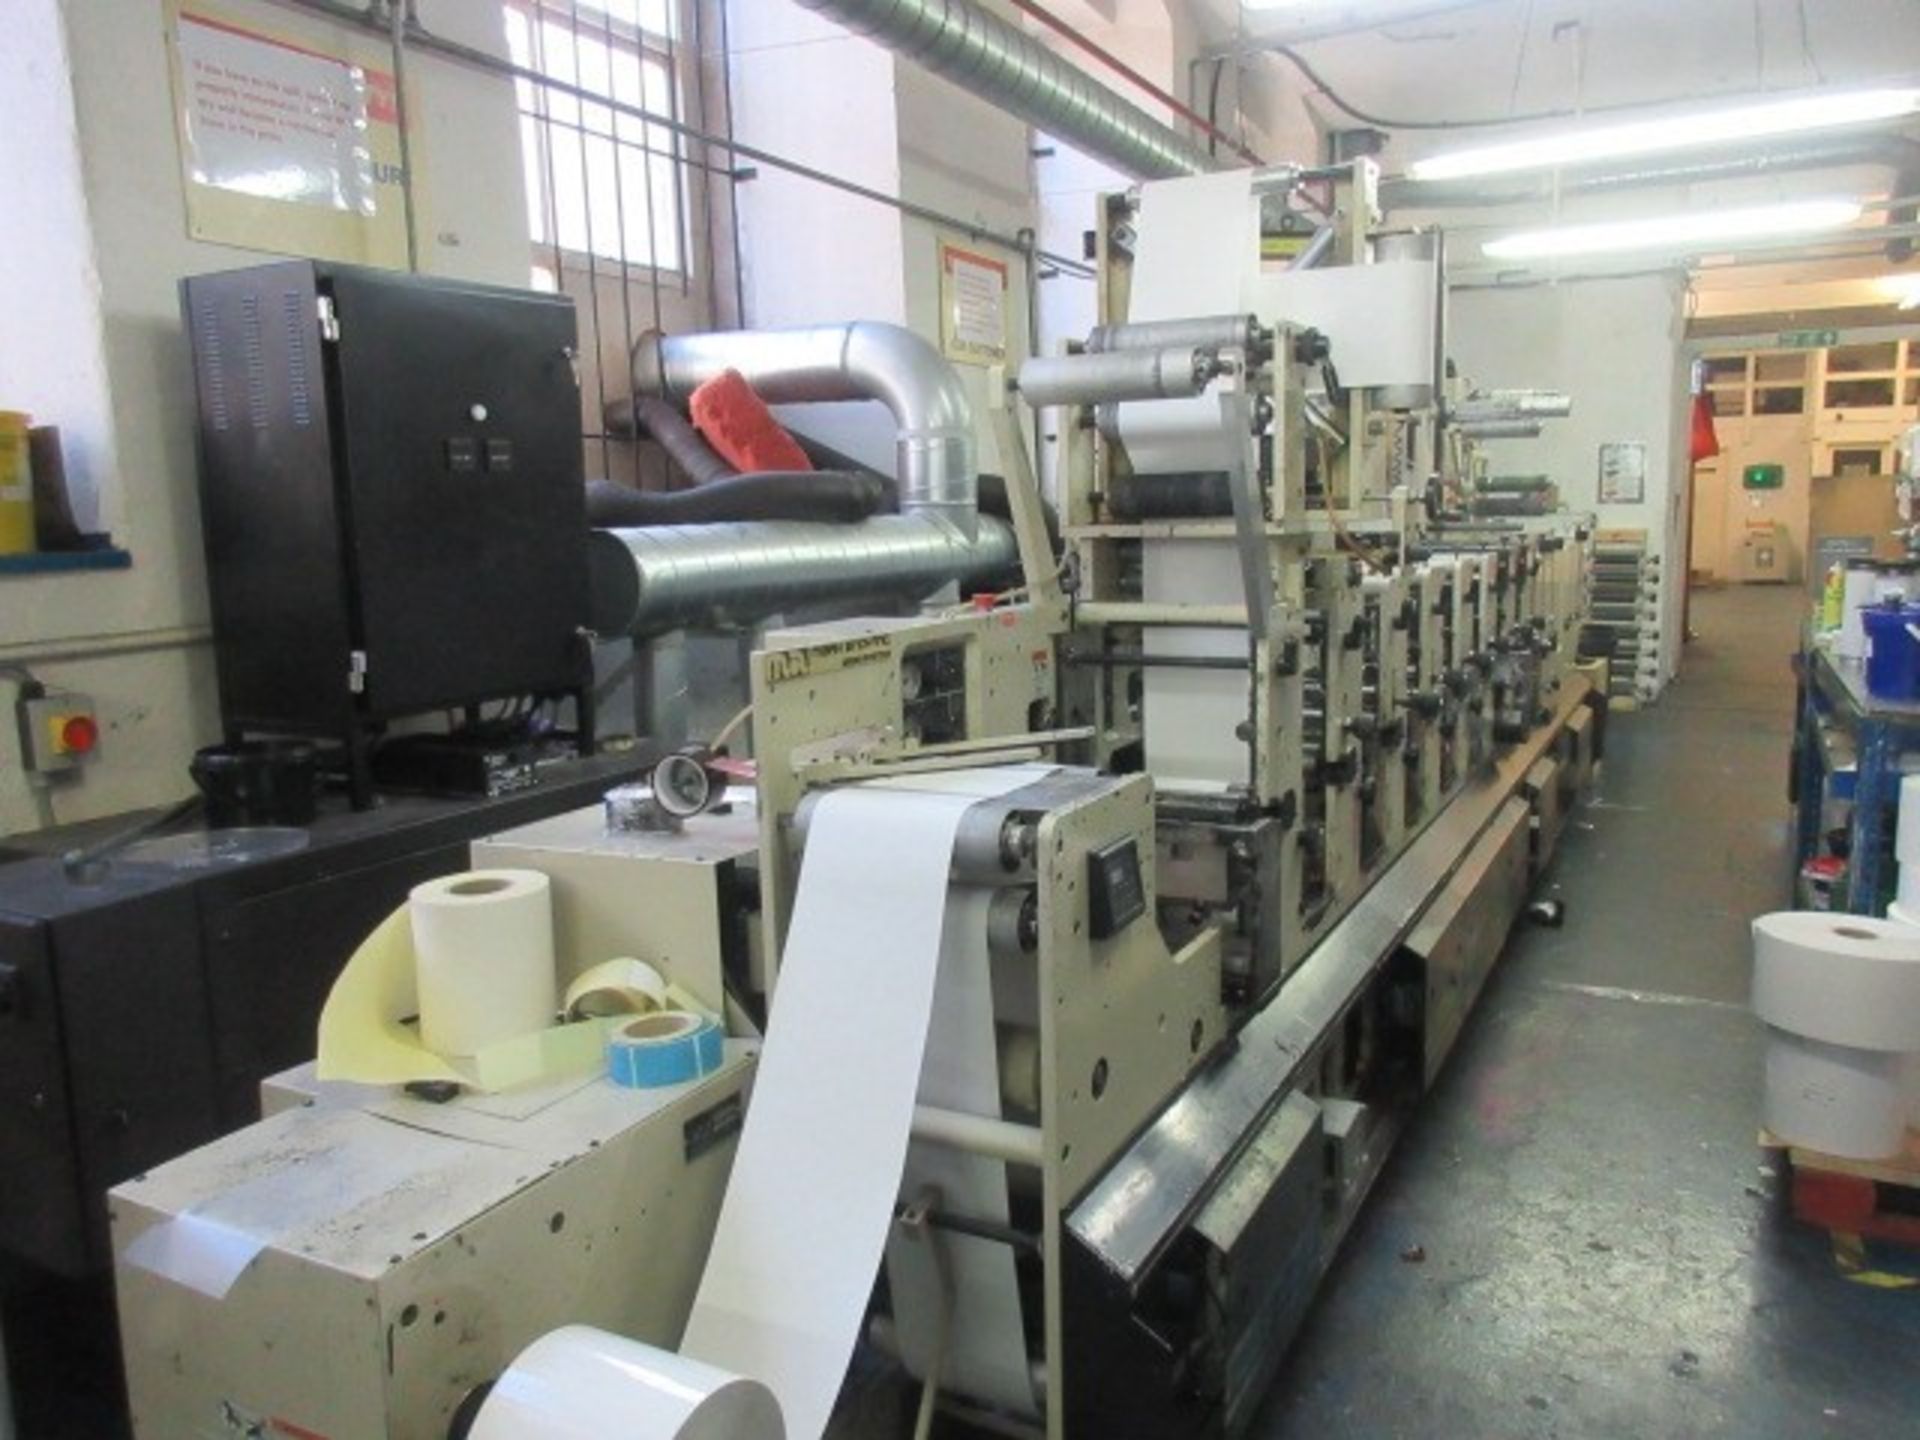 Mark Andy 2200-10F 10” 8 colour flexographic label printing press. Serial no: 1260086 (2002) - Image 264 of 383